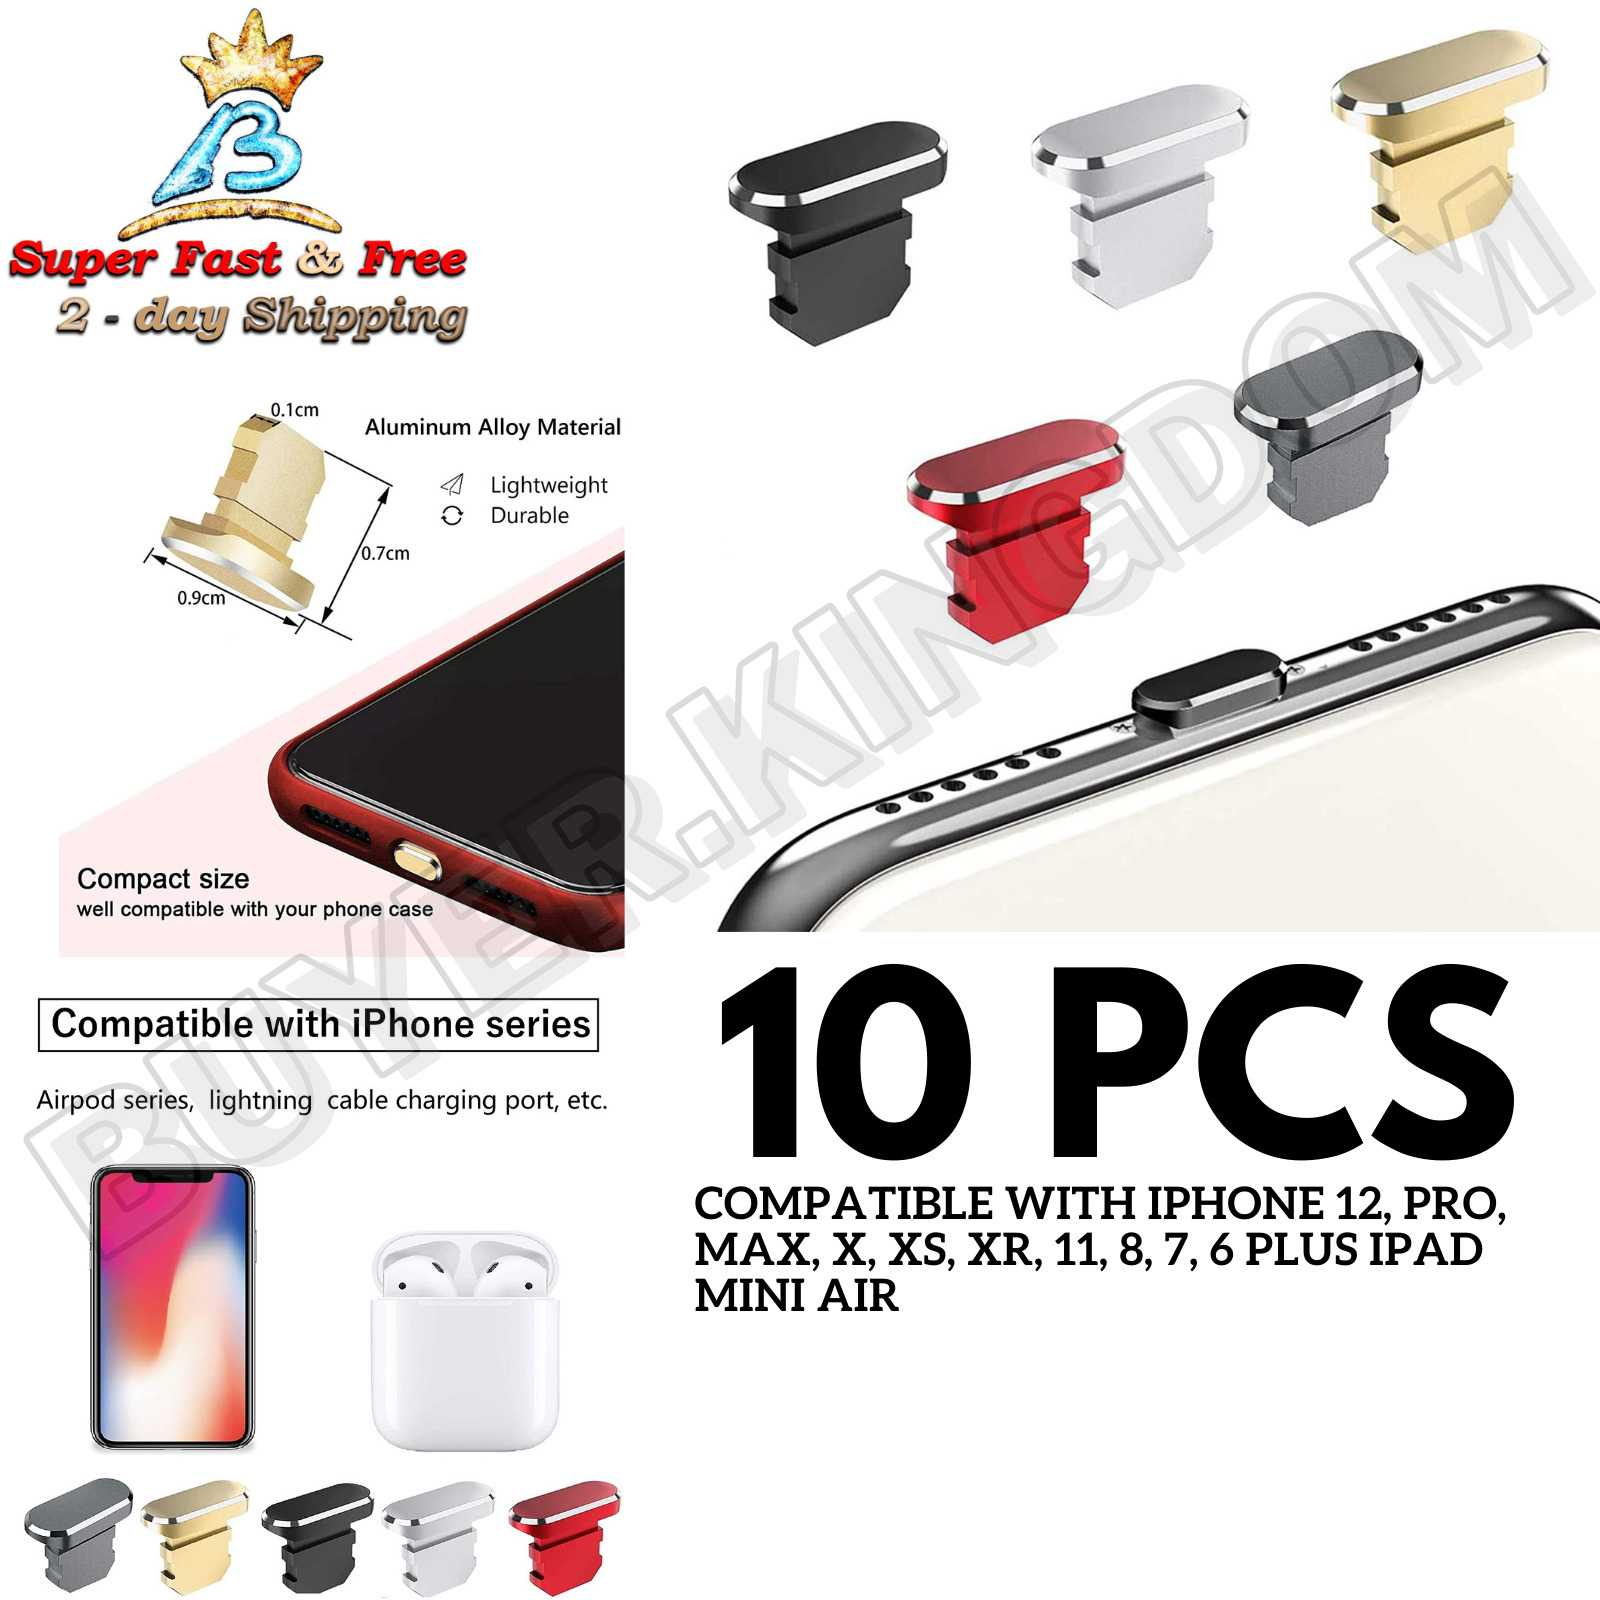 10 Pcs Anti Dust Plugs Iphone Dust Plug Charging Port Covers For Iphone Pro Max